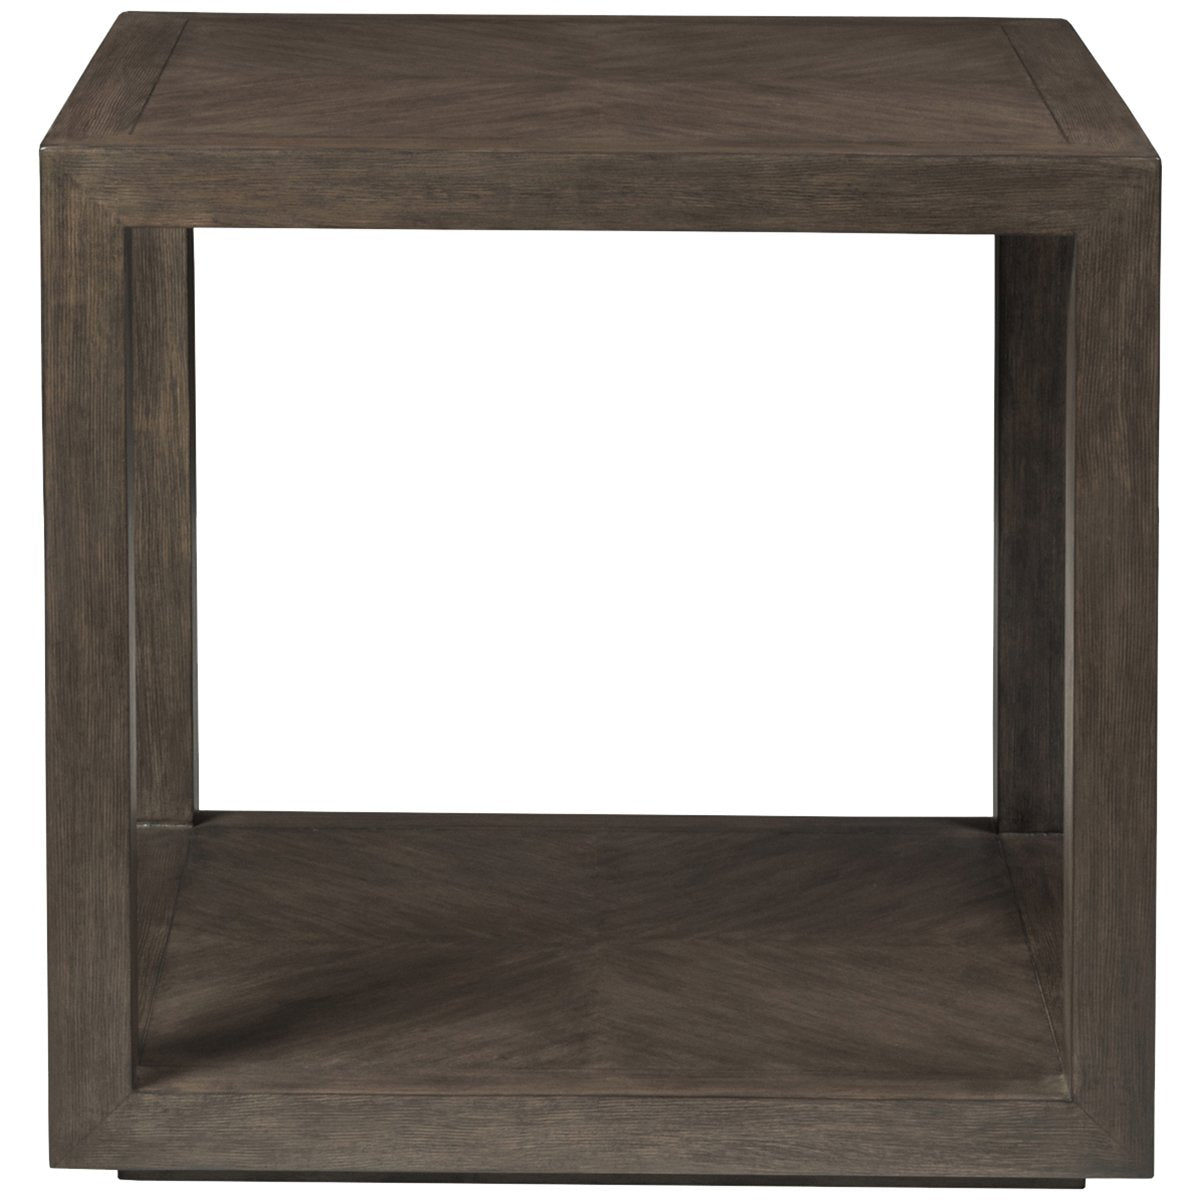 Artistica Home Credence Square End Table 2094-957-39